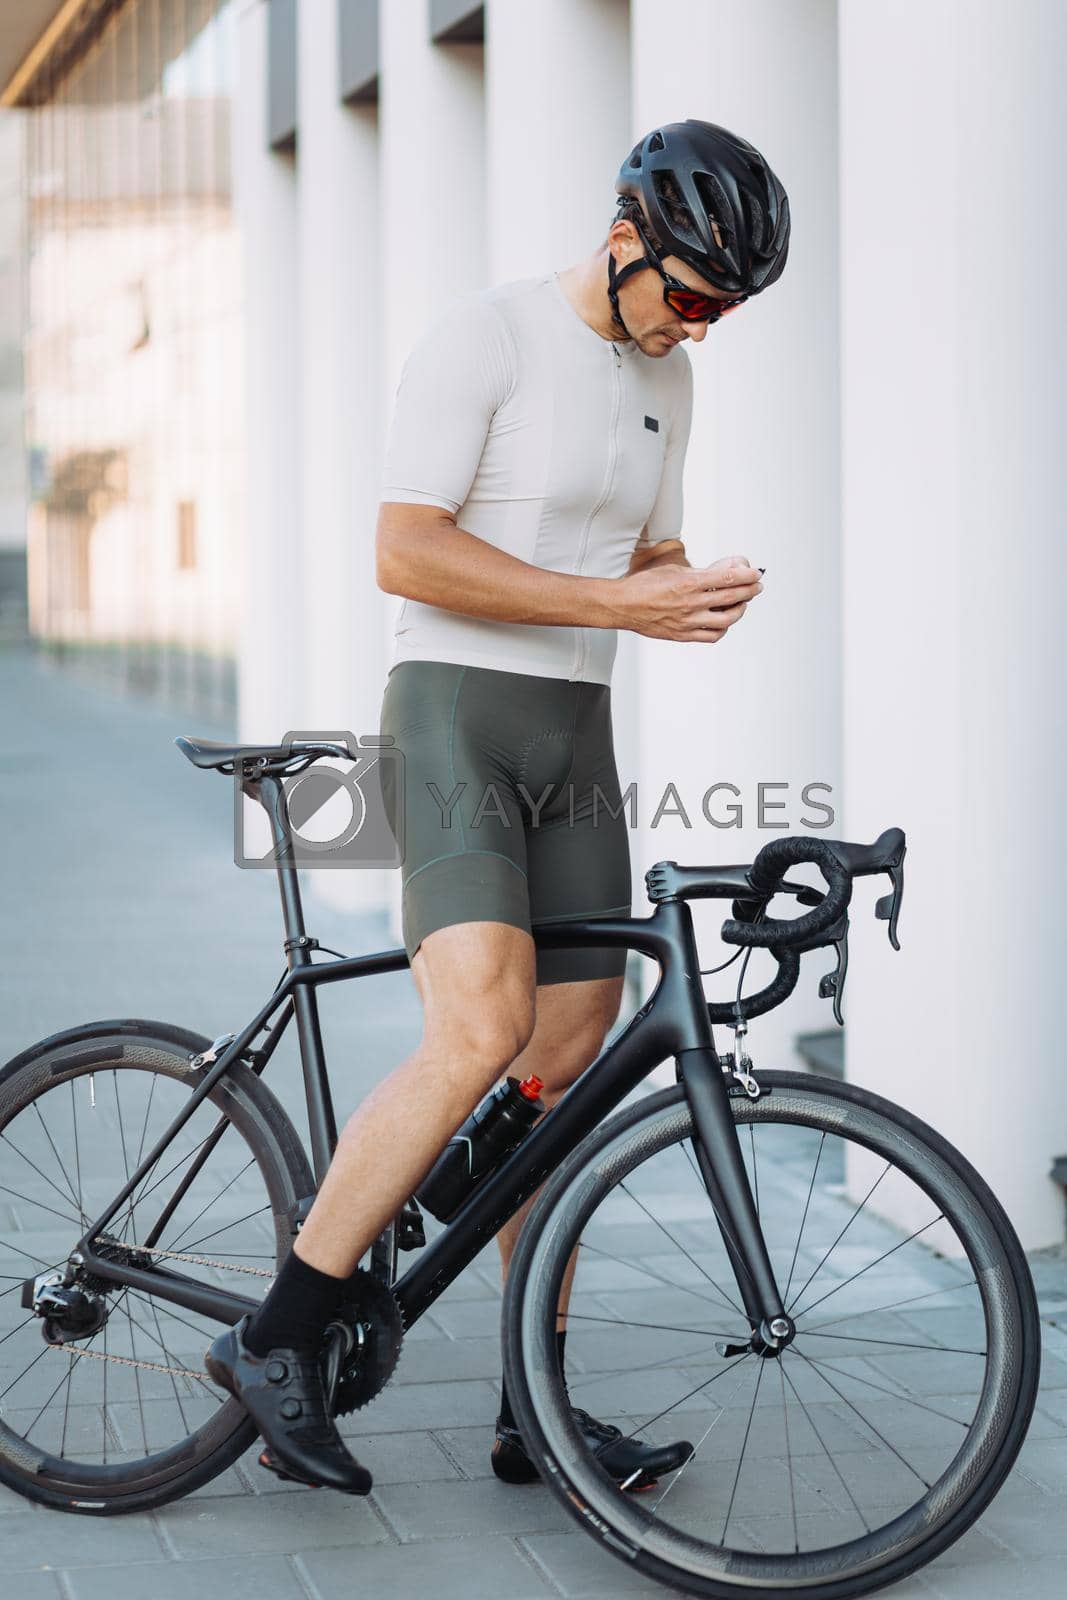 Royalty free image of Cyclist standing with bike and holding modern navigator by Tymoshchuk